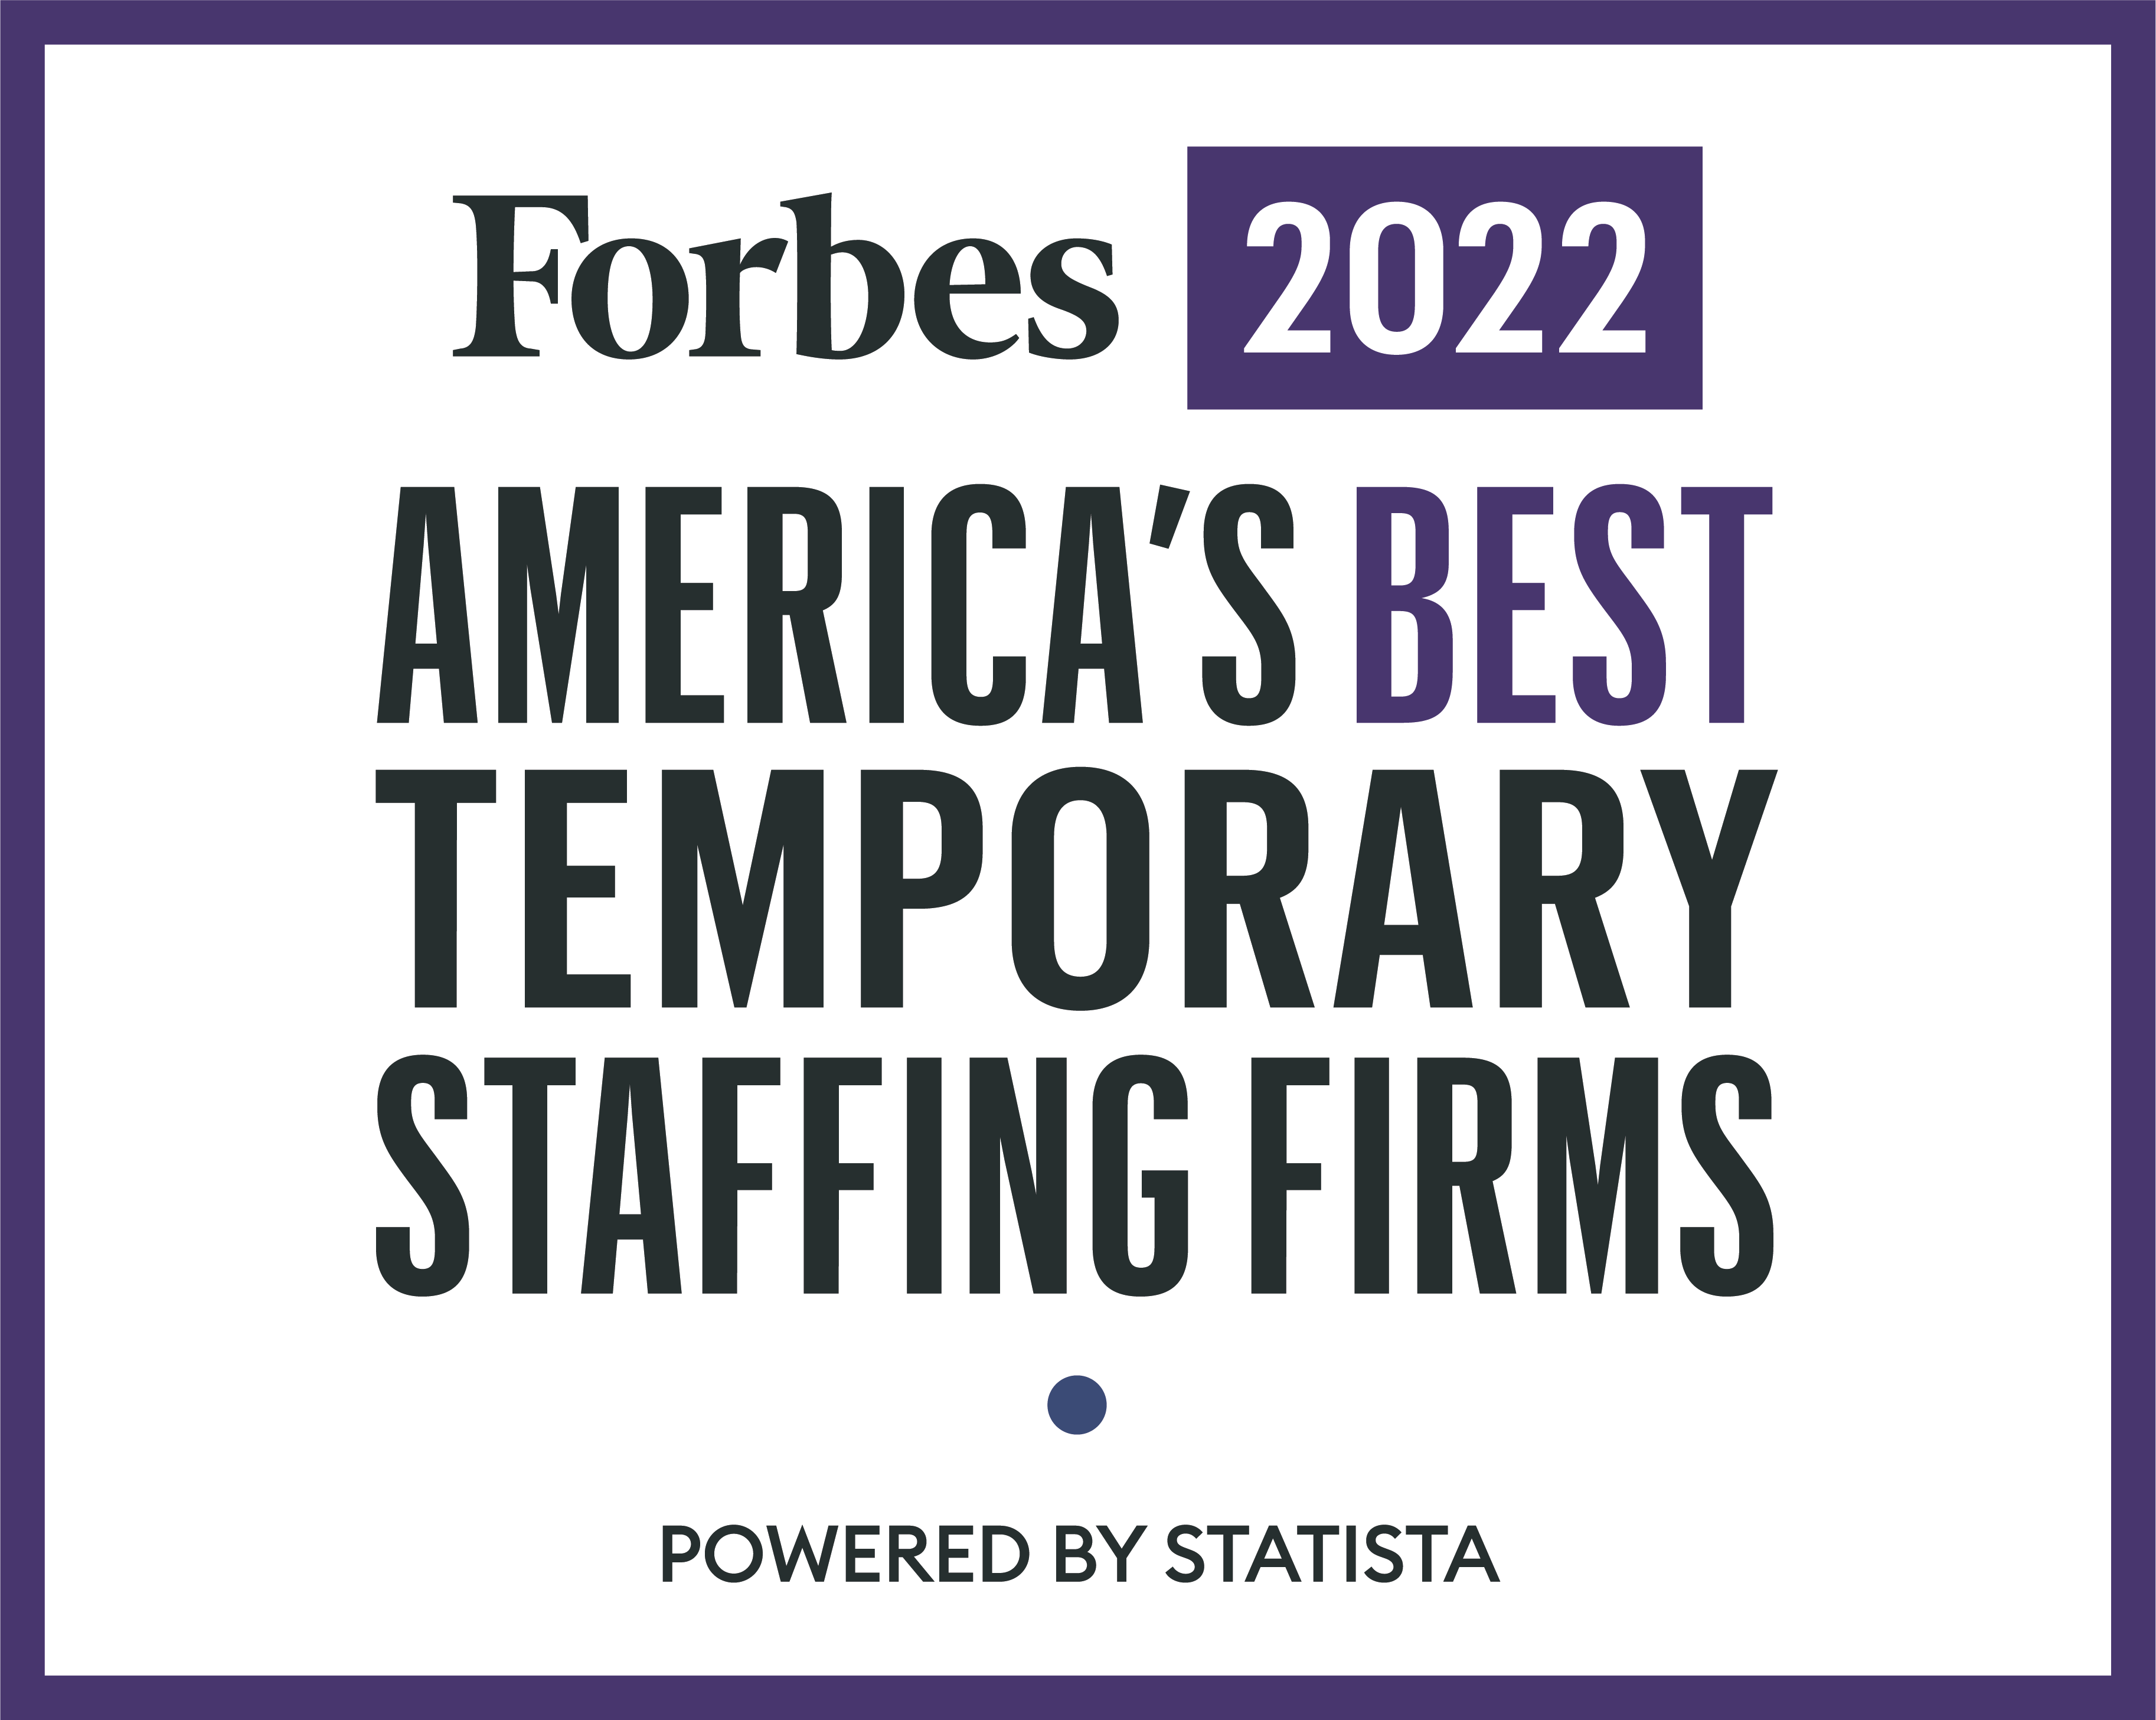 Forbes America's Best Temporary Staffing Firms 2020